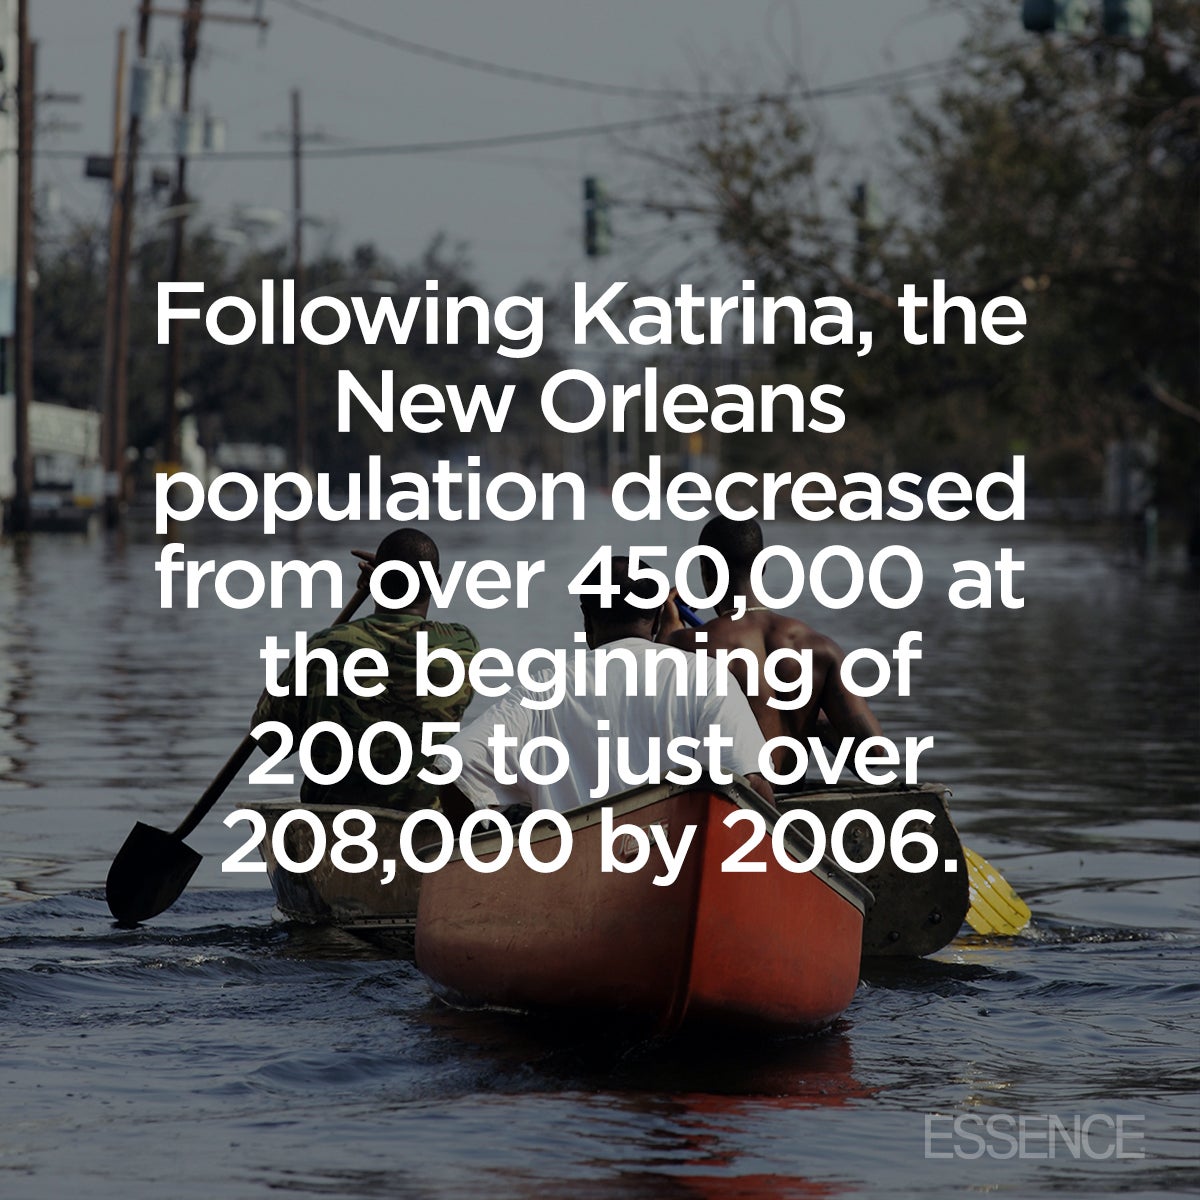 11 Years Later: Here's What You Need To Know About Hurricane Katrina
